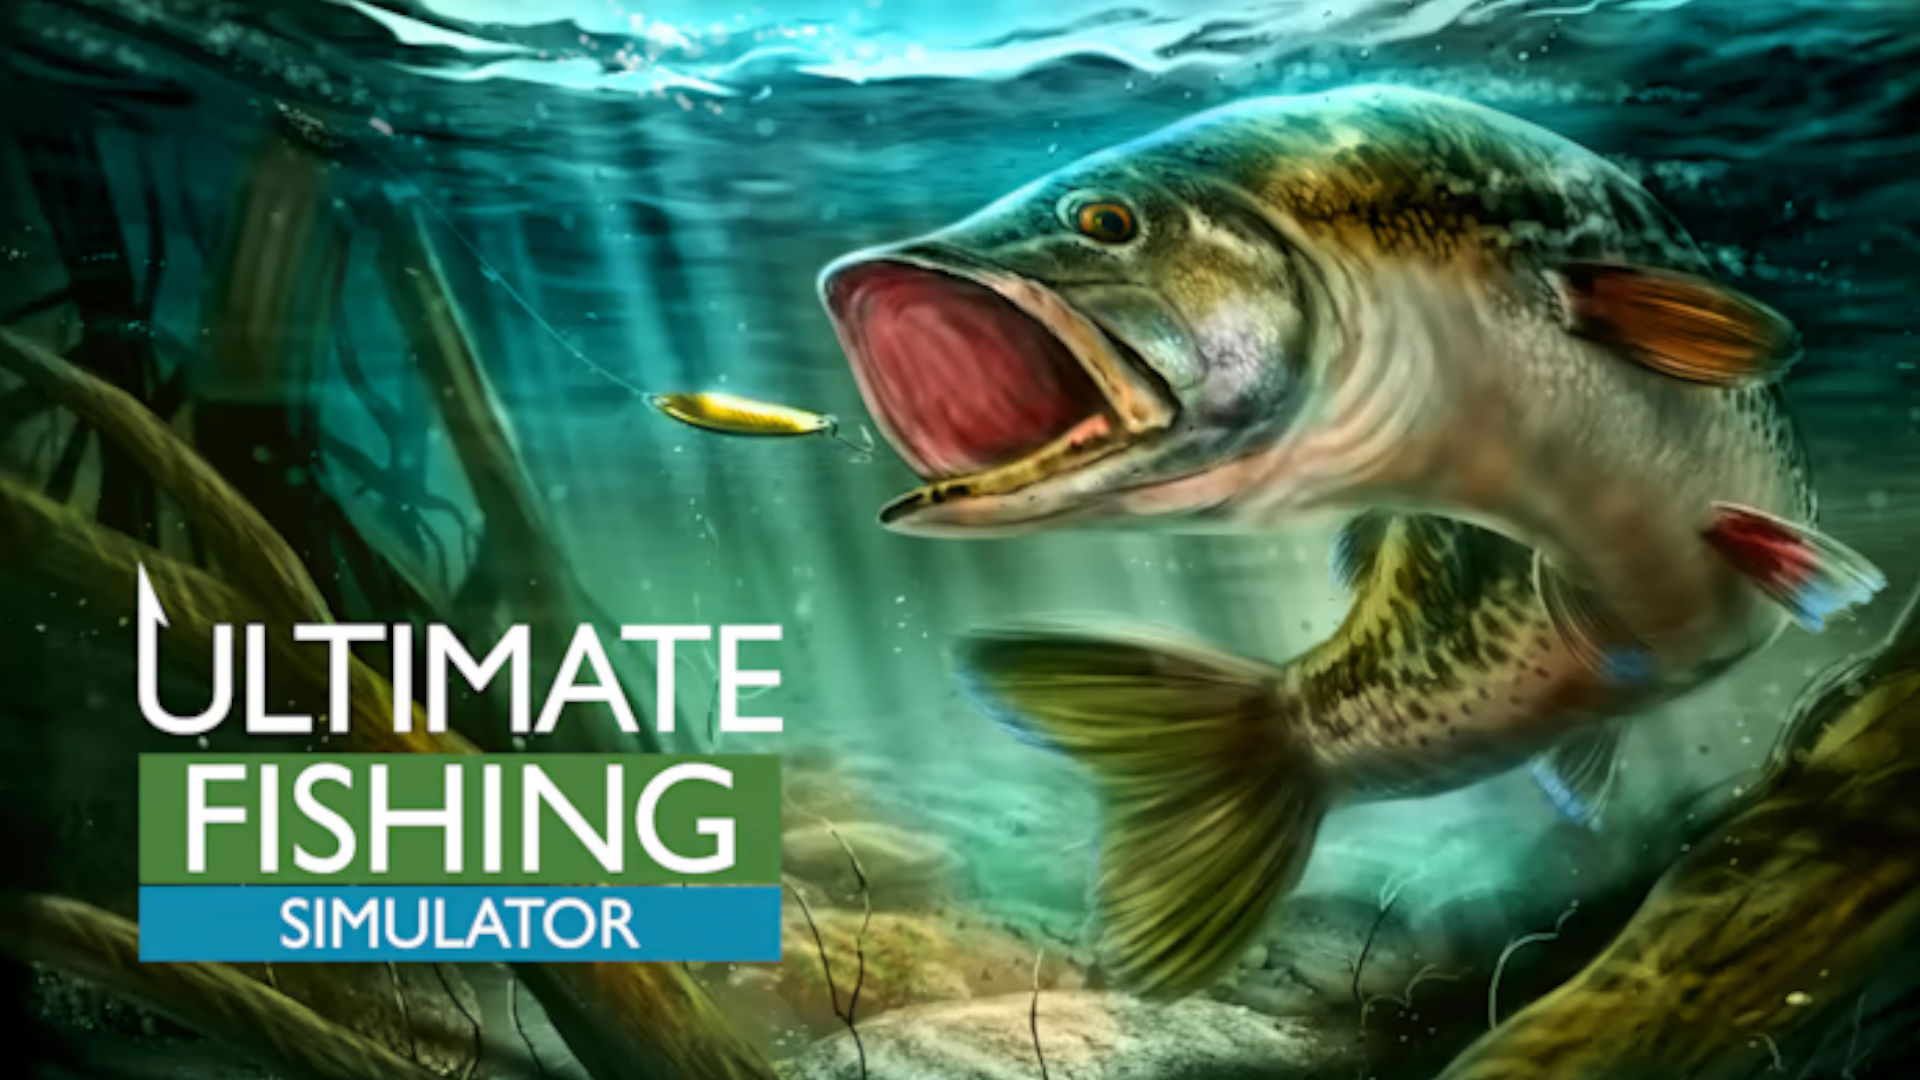 Ultimate Fishing Simulator cover, one of the more realistic fishing games